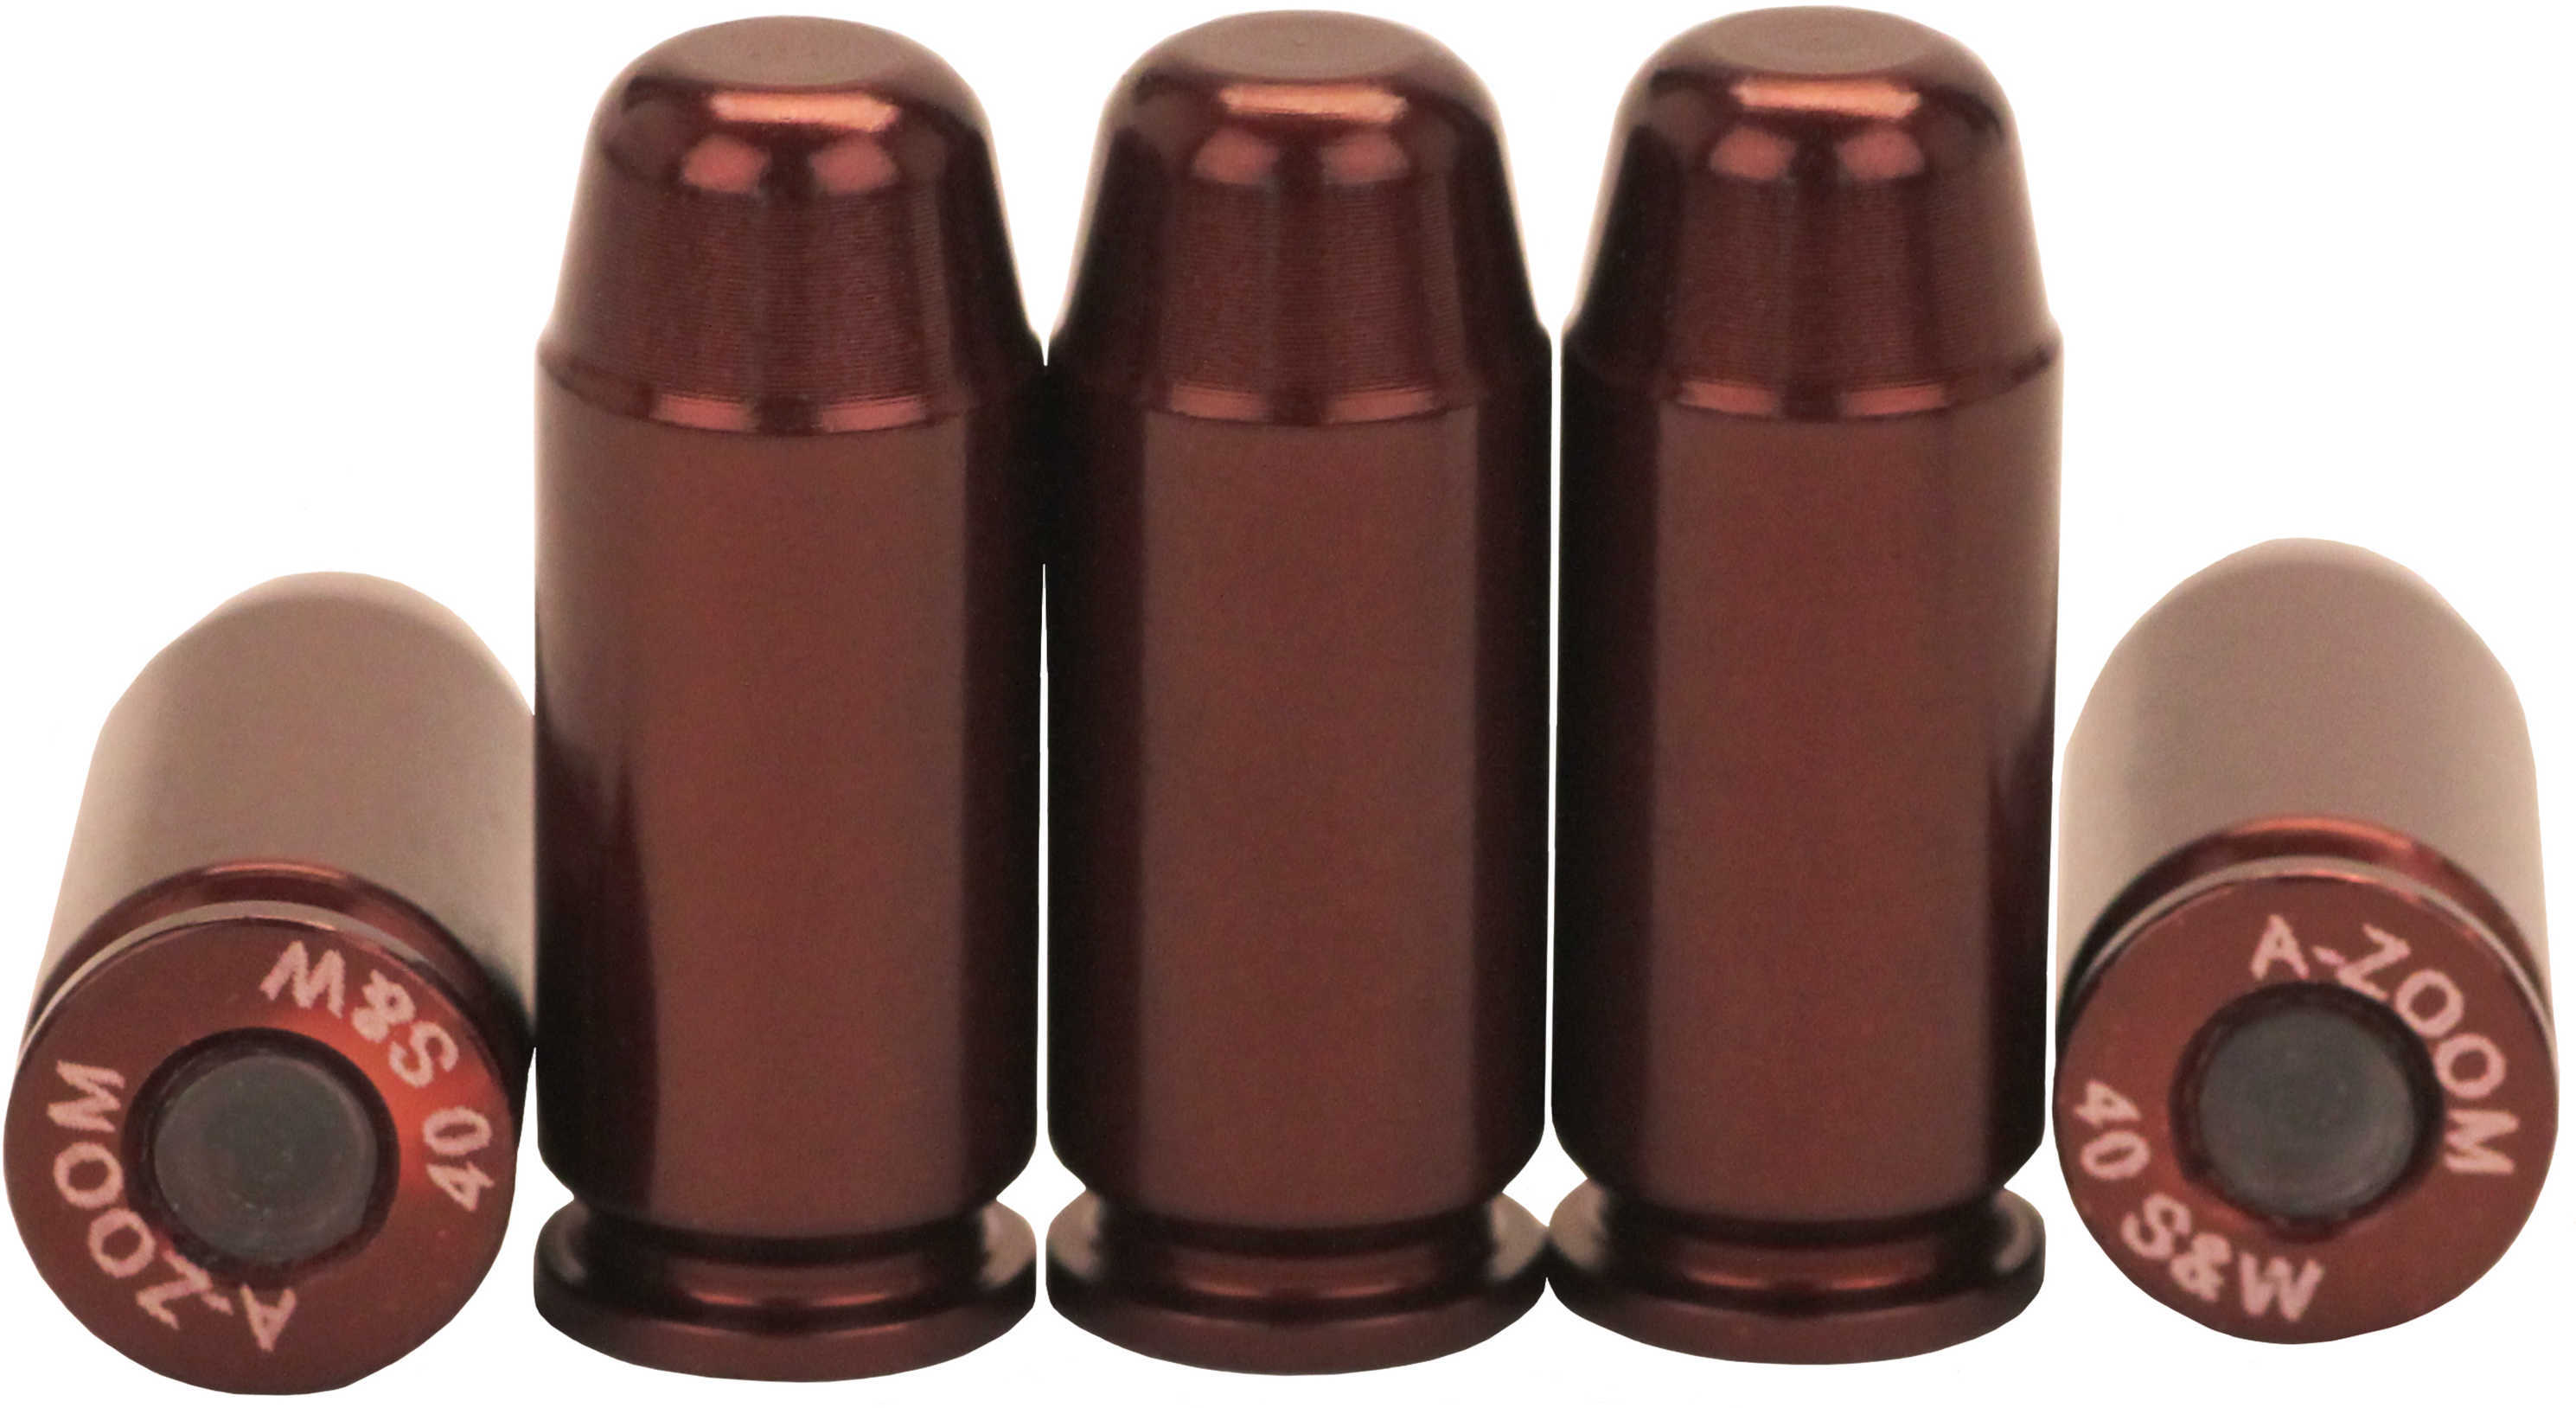 A-ZOOM 40 S and W Snap Cap 5PK